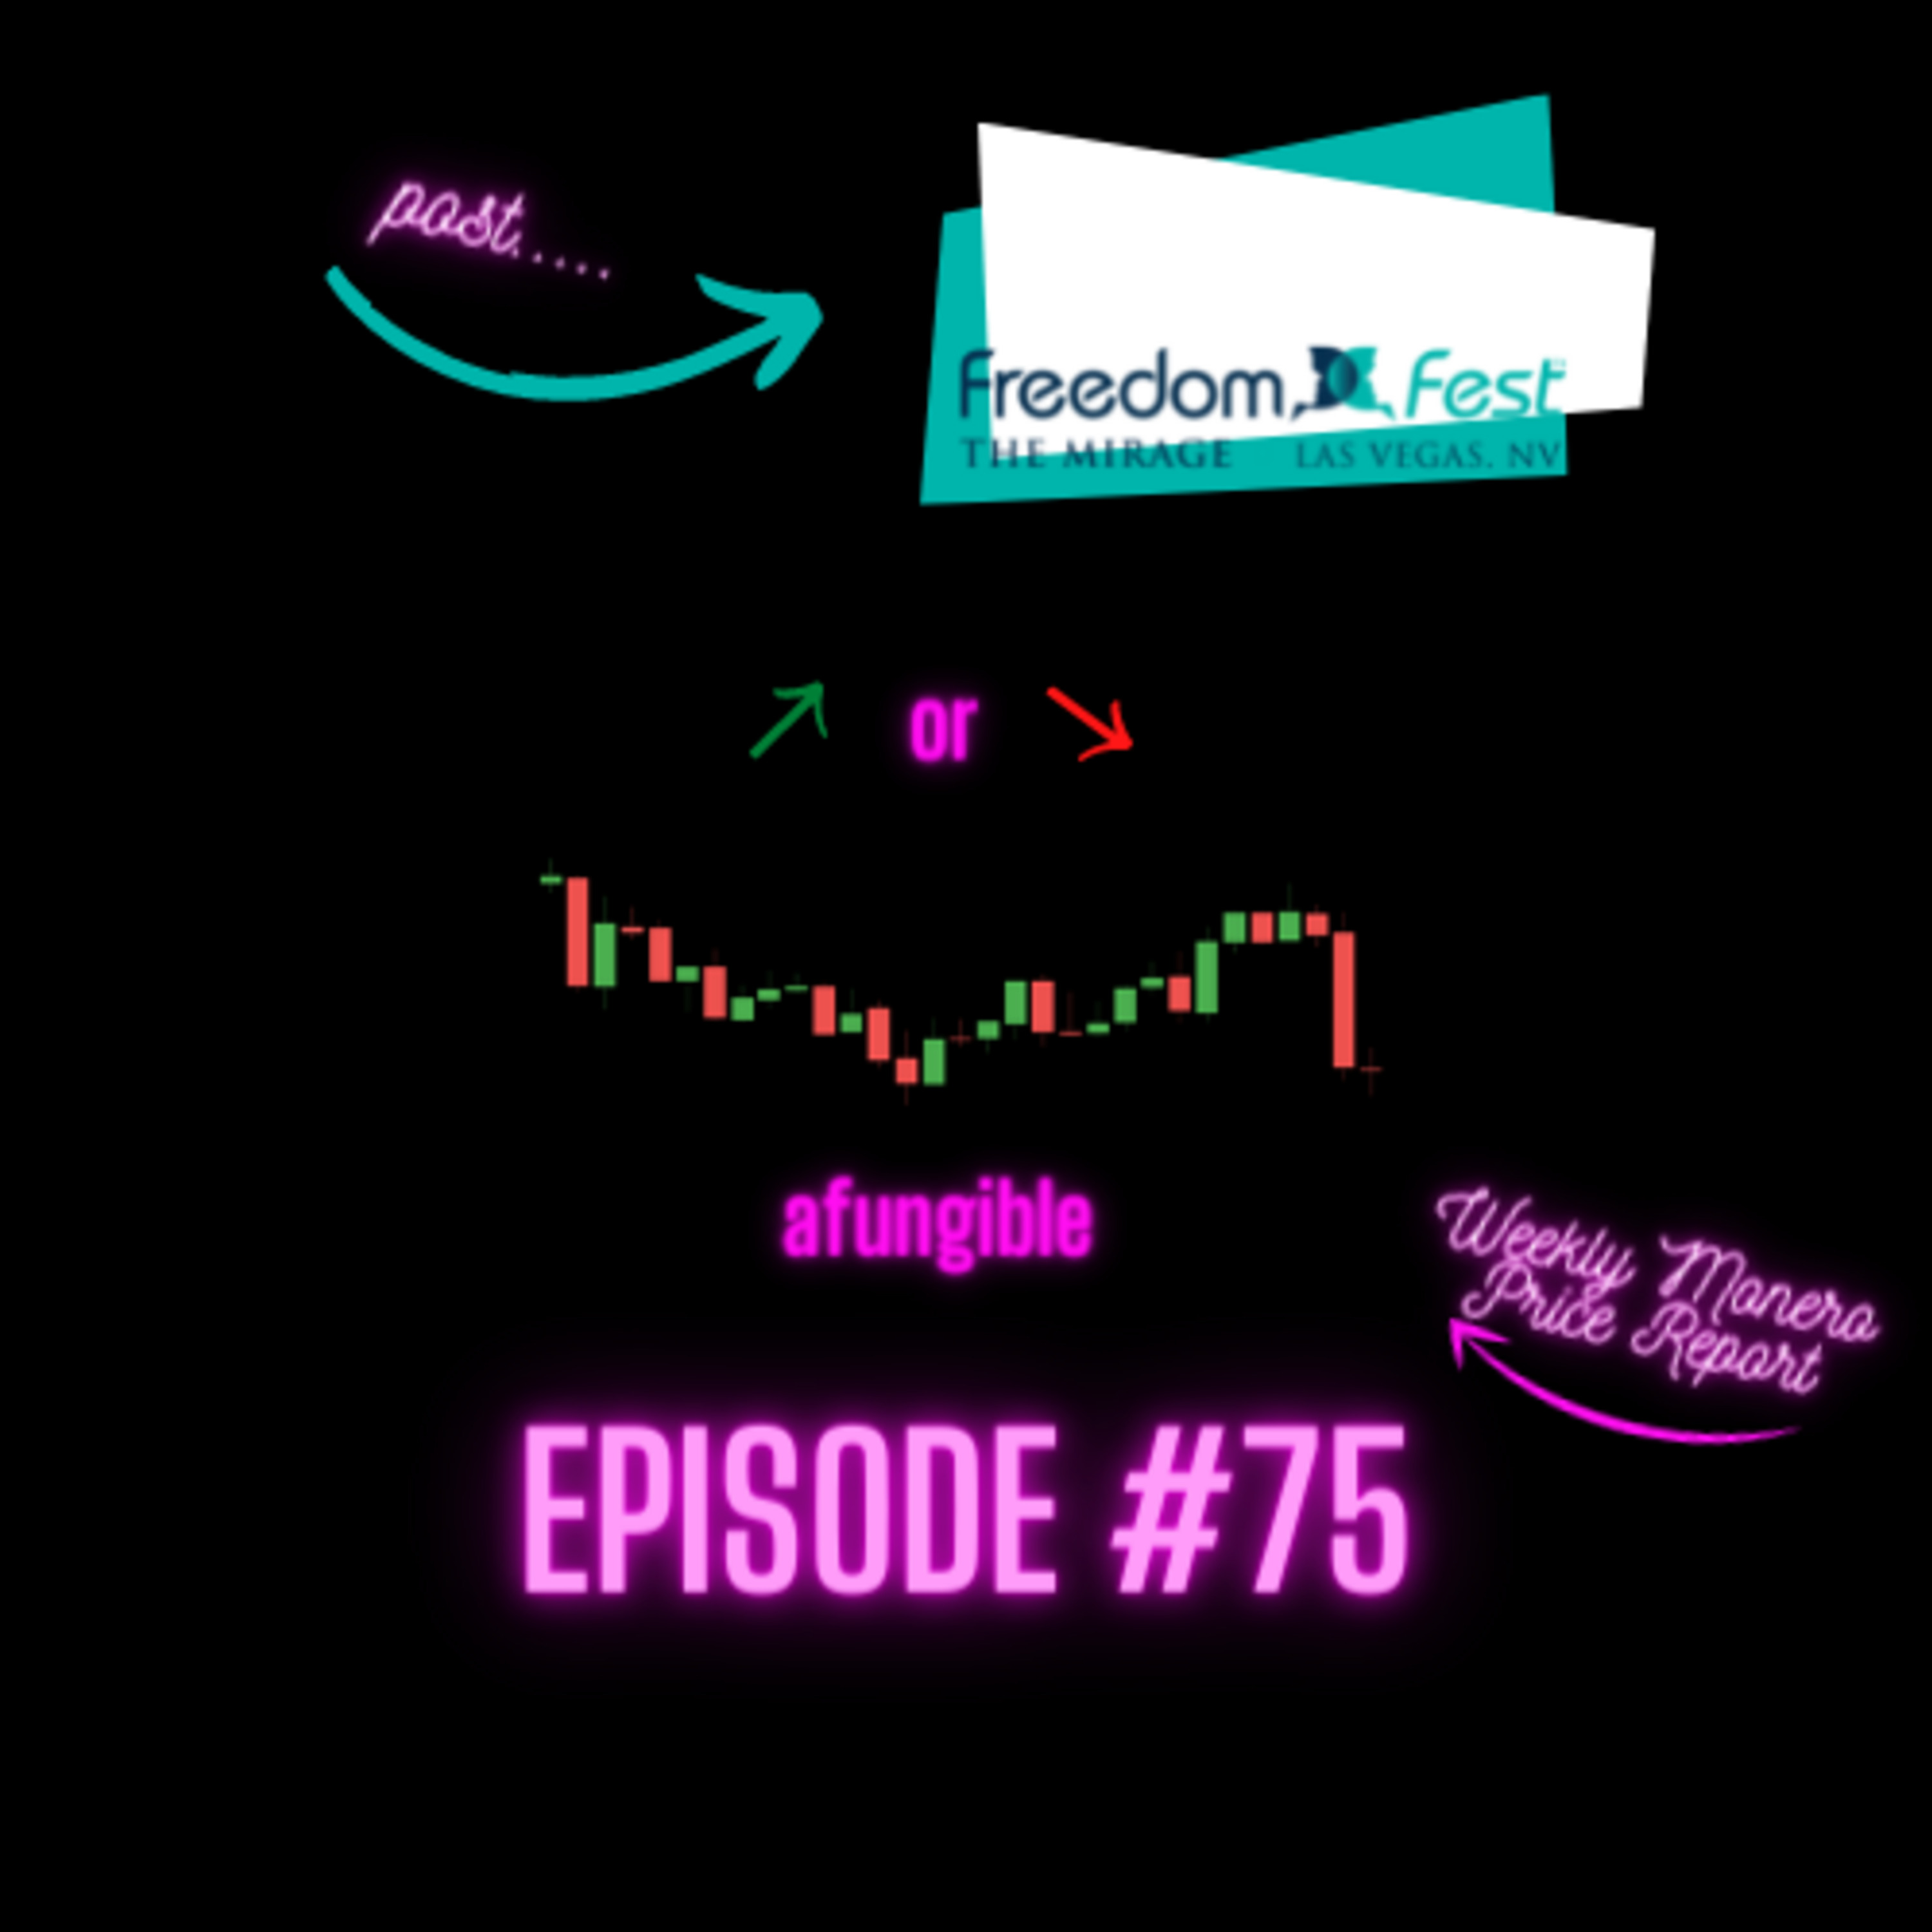 aFungible Price Report, FreedomFest friend, Adam Friedman & MUCH More! Epi#75